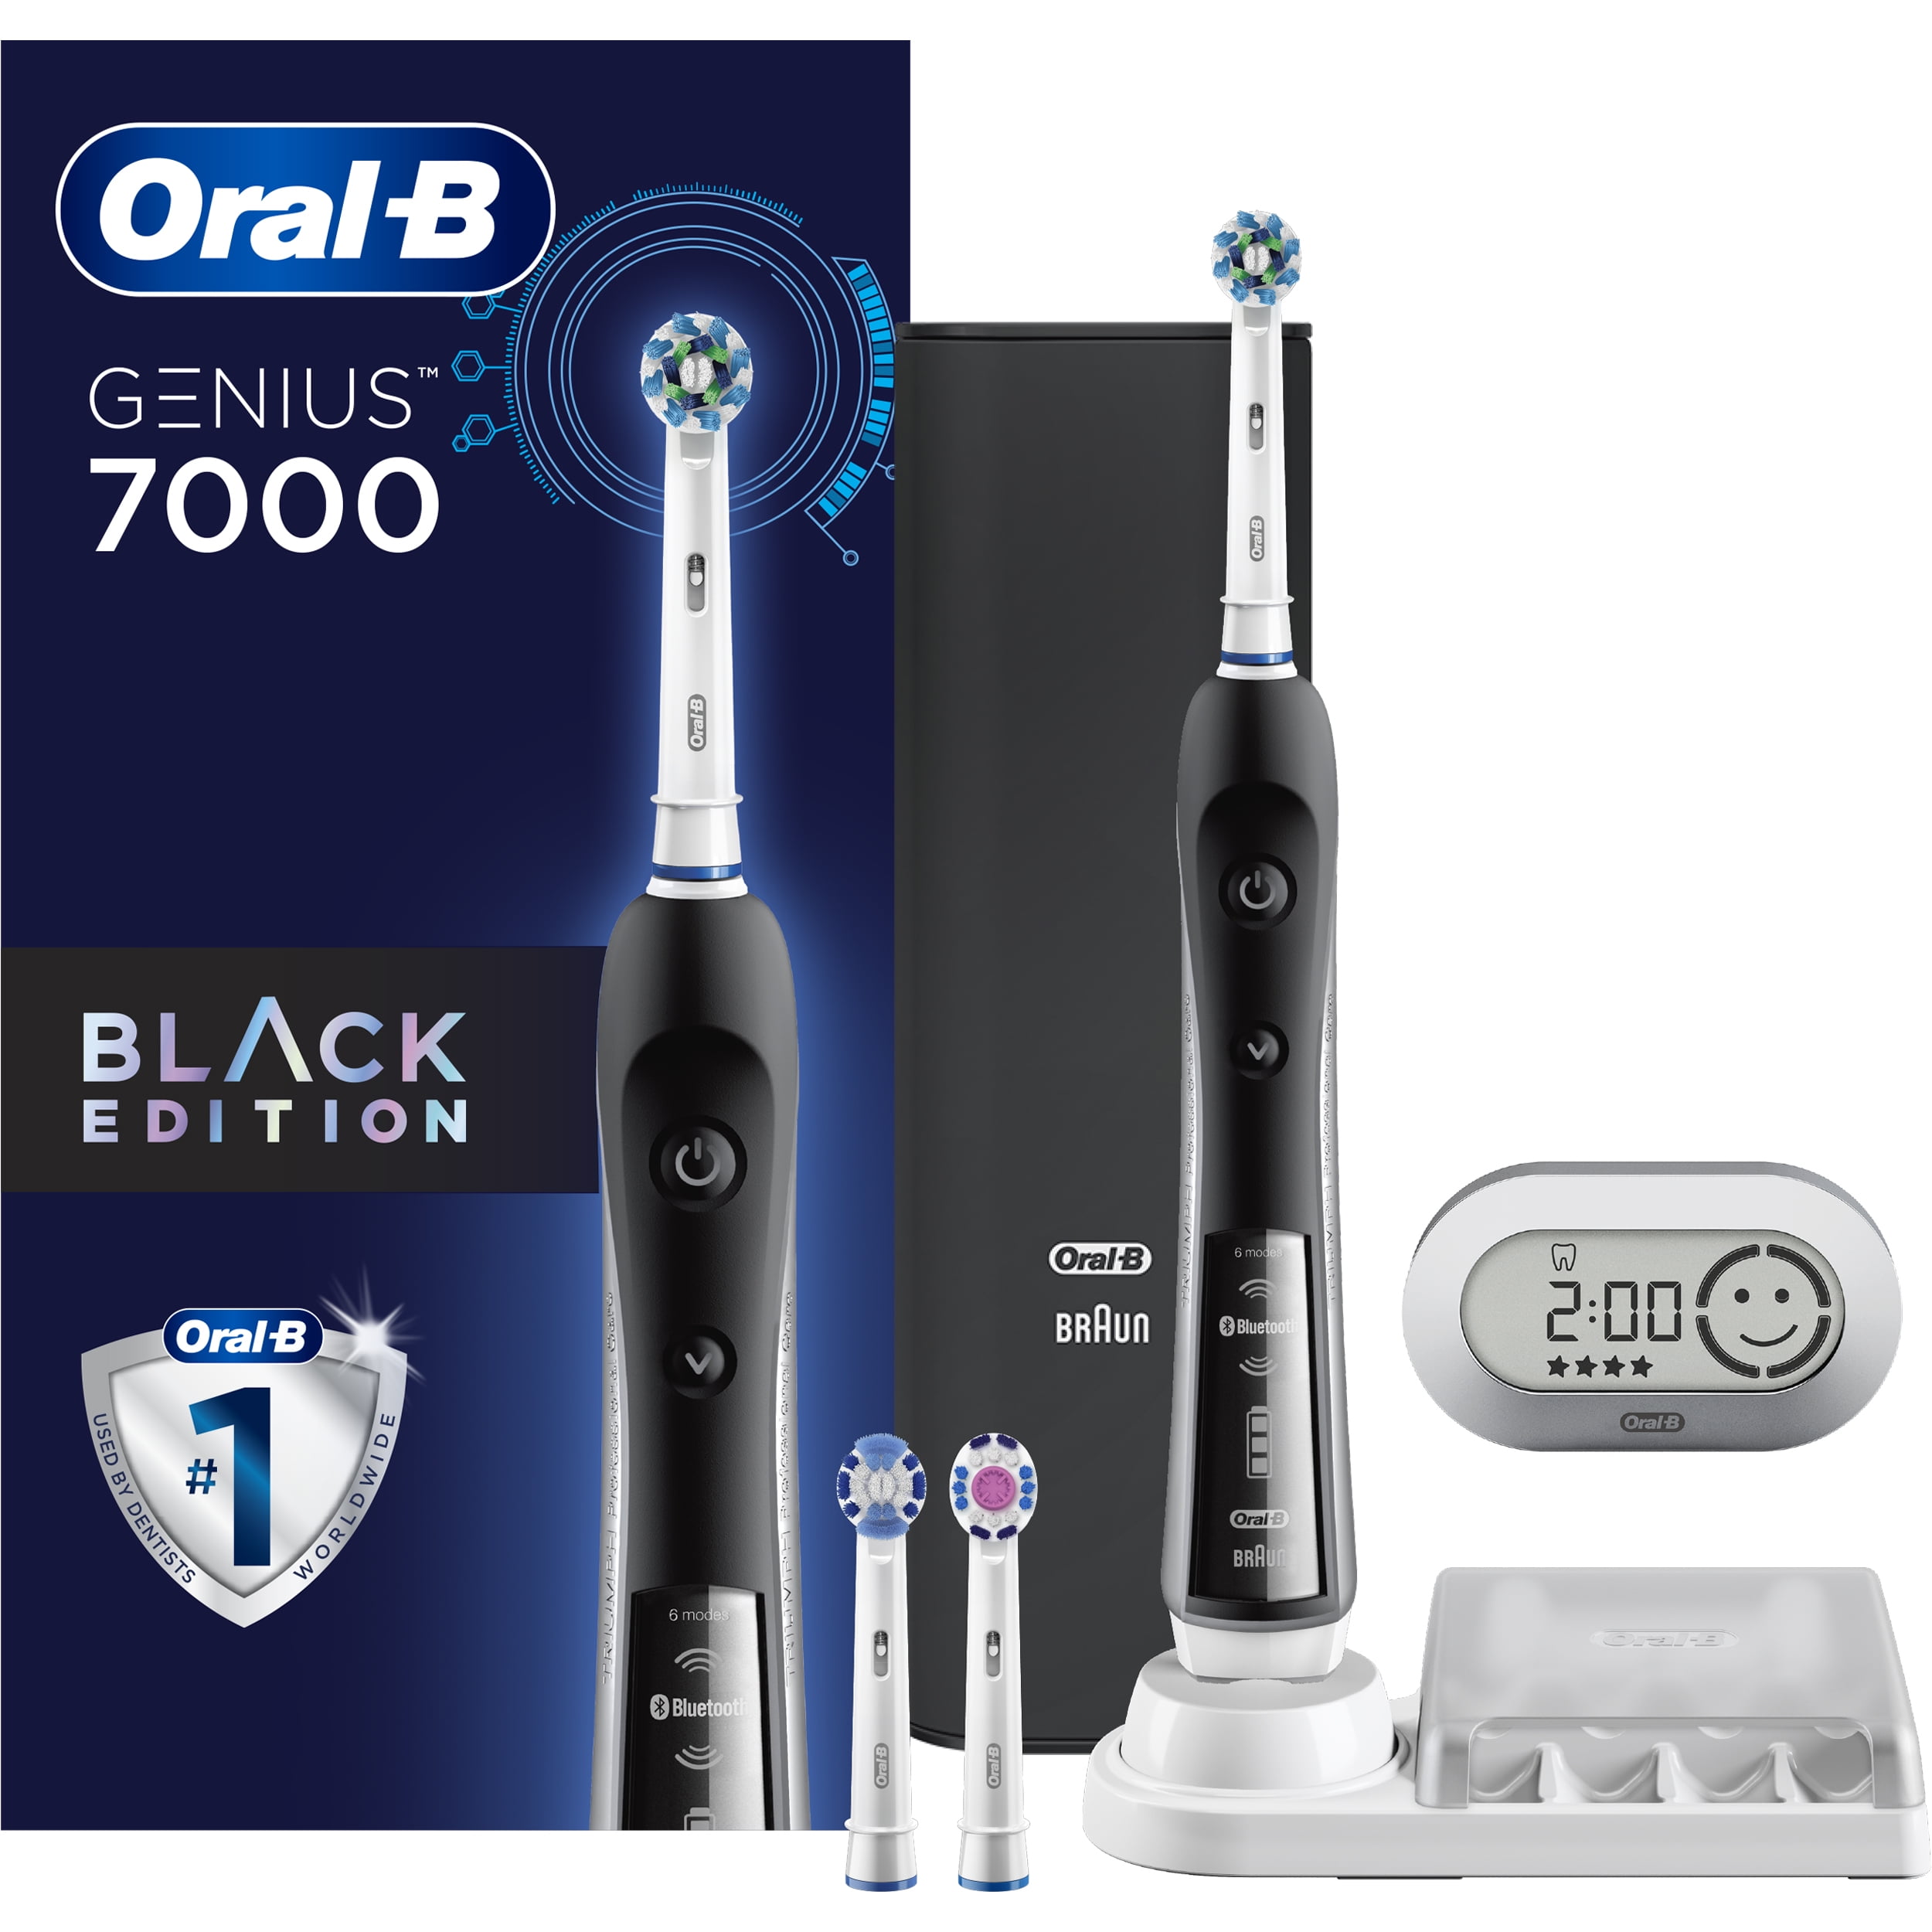 Profeet Expertise nogmaals Electric Toothbrush, Oral-B Pro 7000 SmartSeries Black Electronic Power  Rechargeable Toothbrush with Bluetooth Connectivity Powered by Braun -  Walmart.com